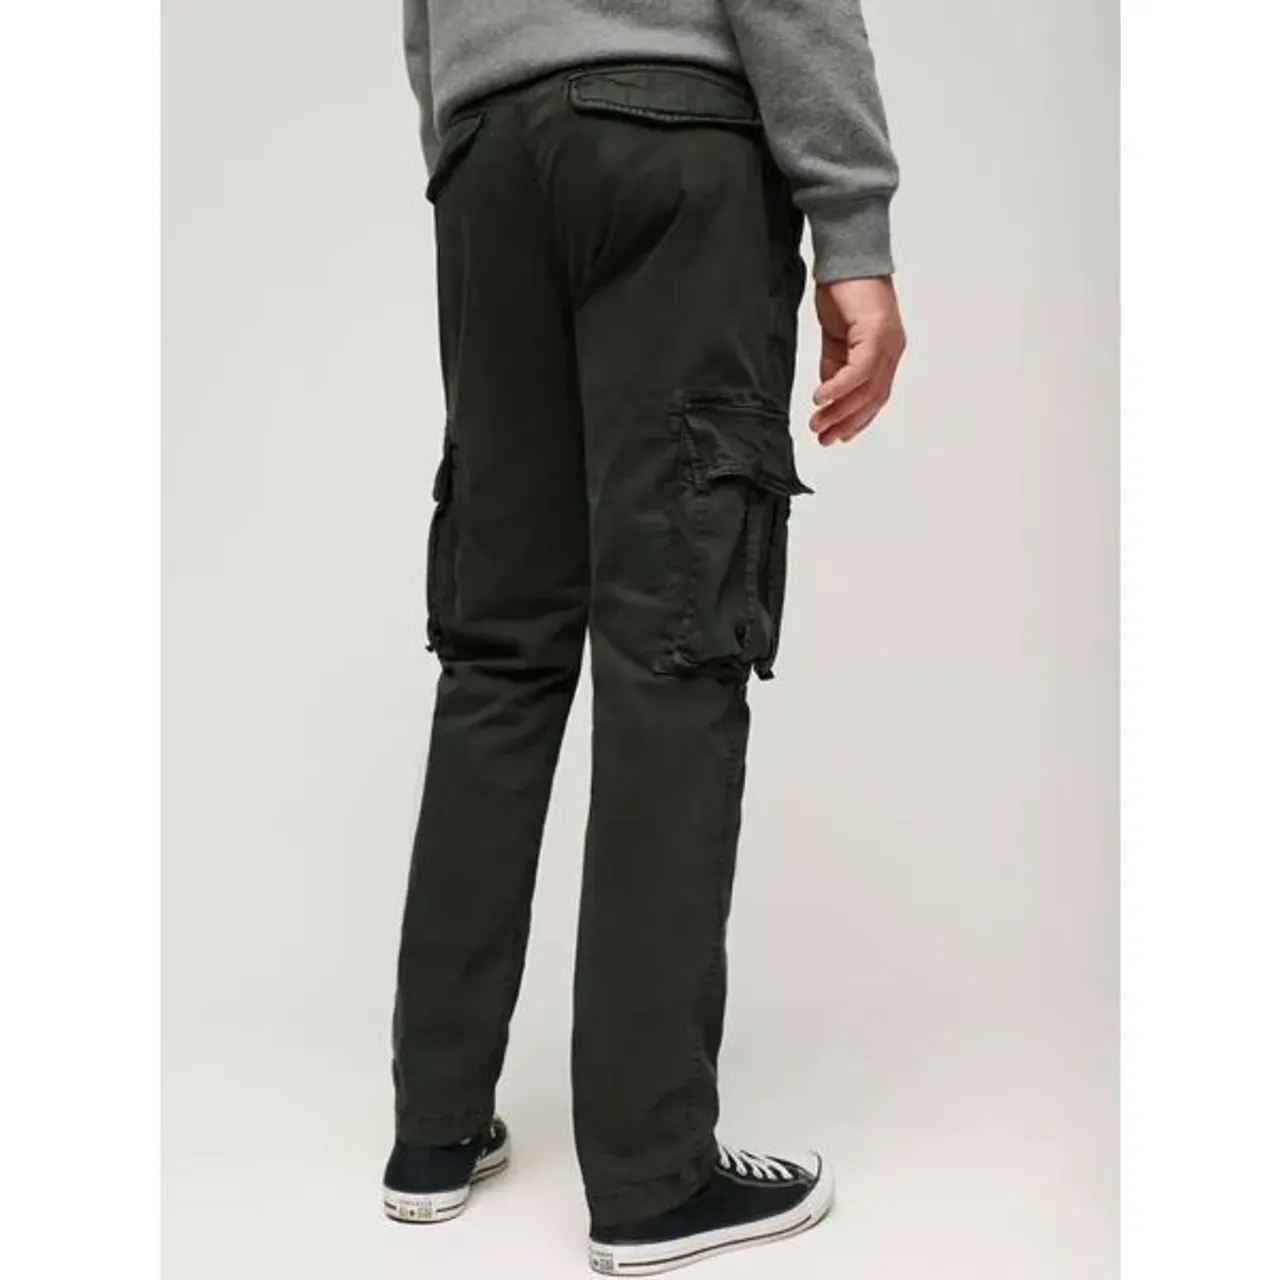 Superdry Core Cargo Pants - Surplus Olive Green - Male